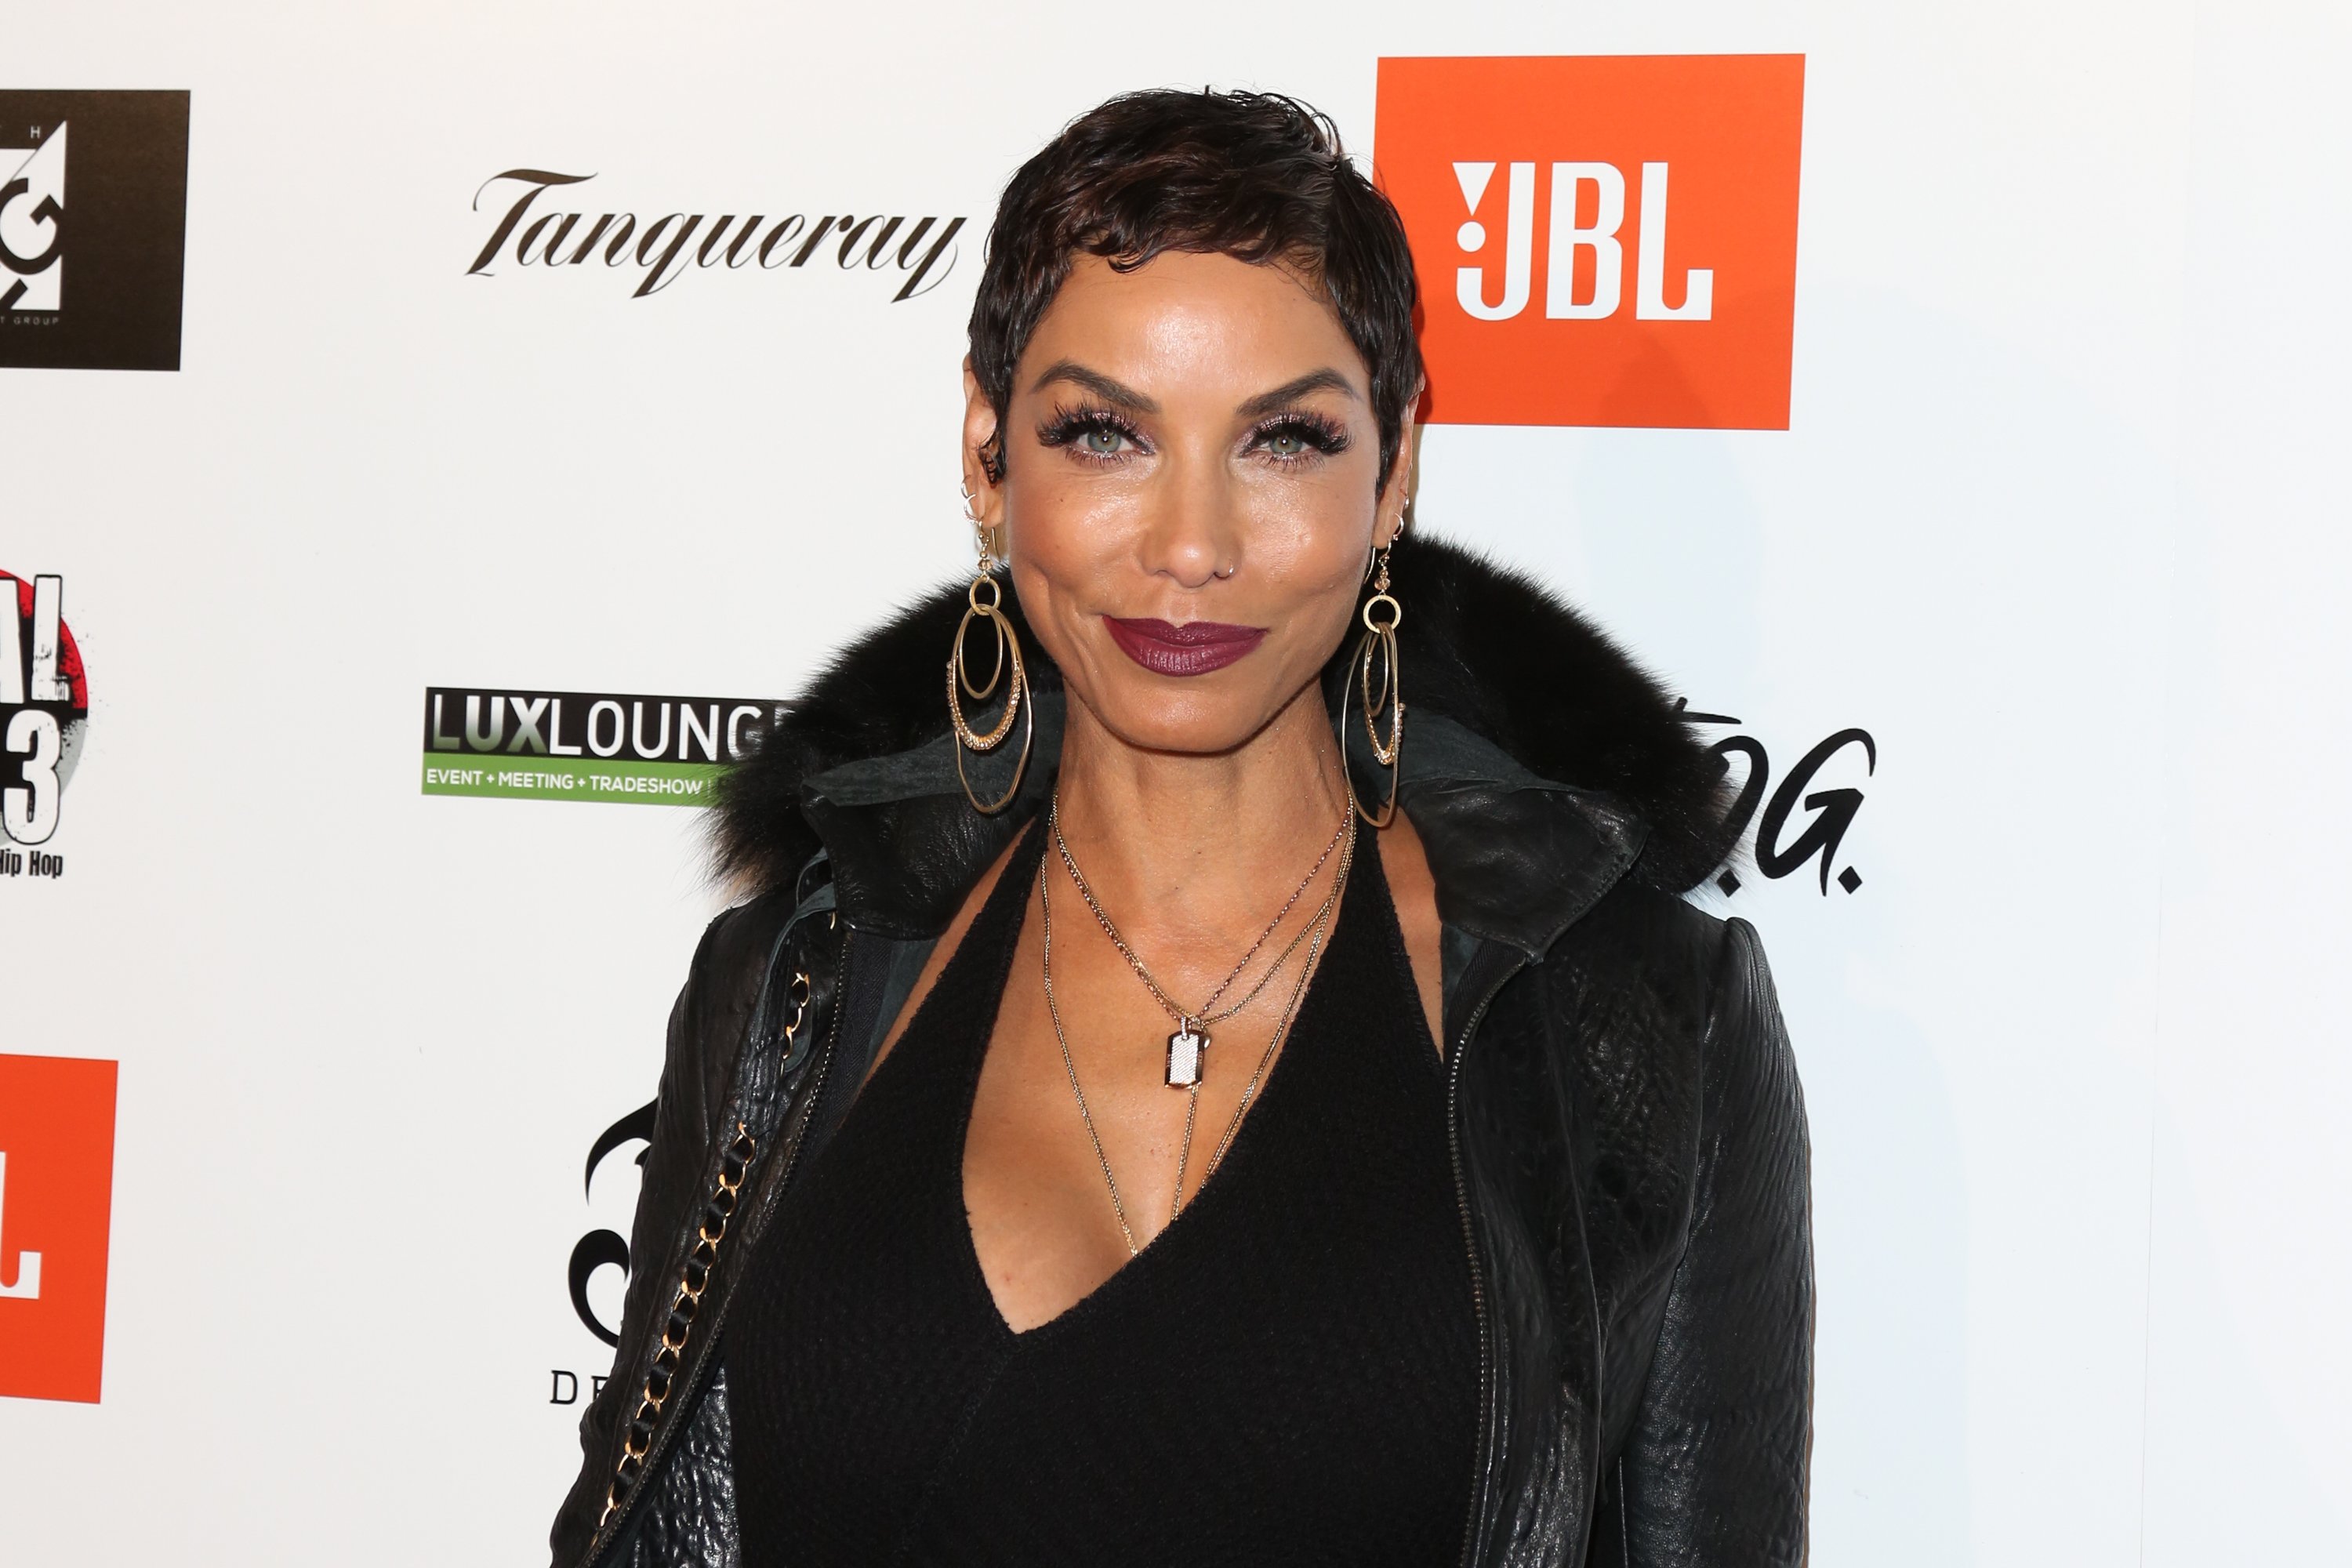 Nicole Murphy attending a JBL all-star bash in February 2018. | Photo: Getty Images/GlobalImagesUkraine